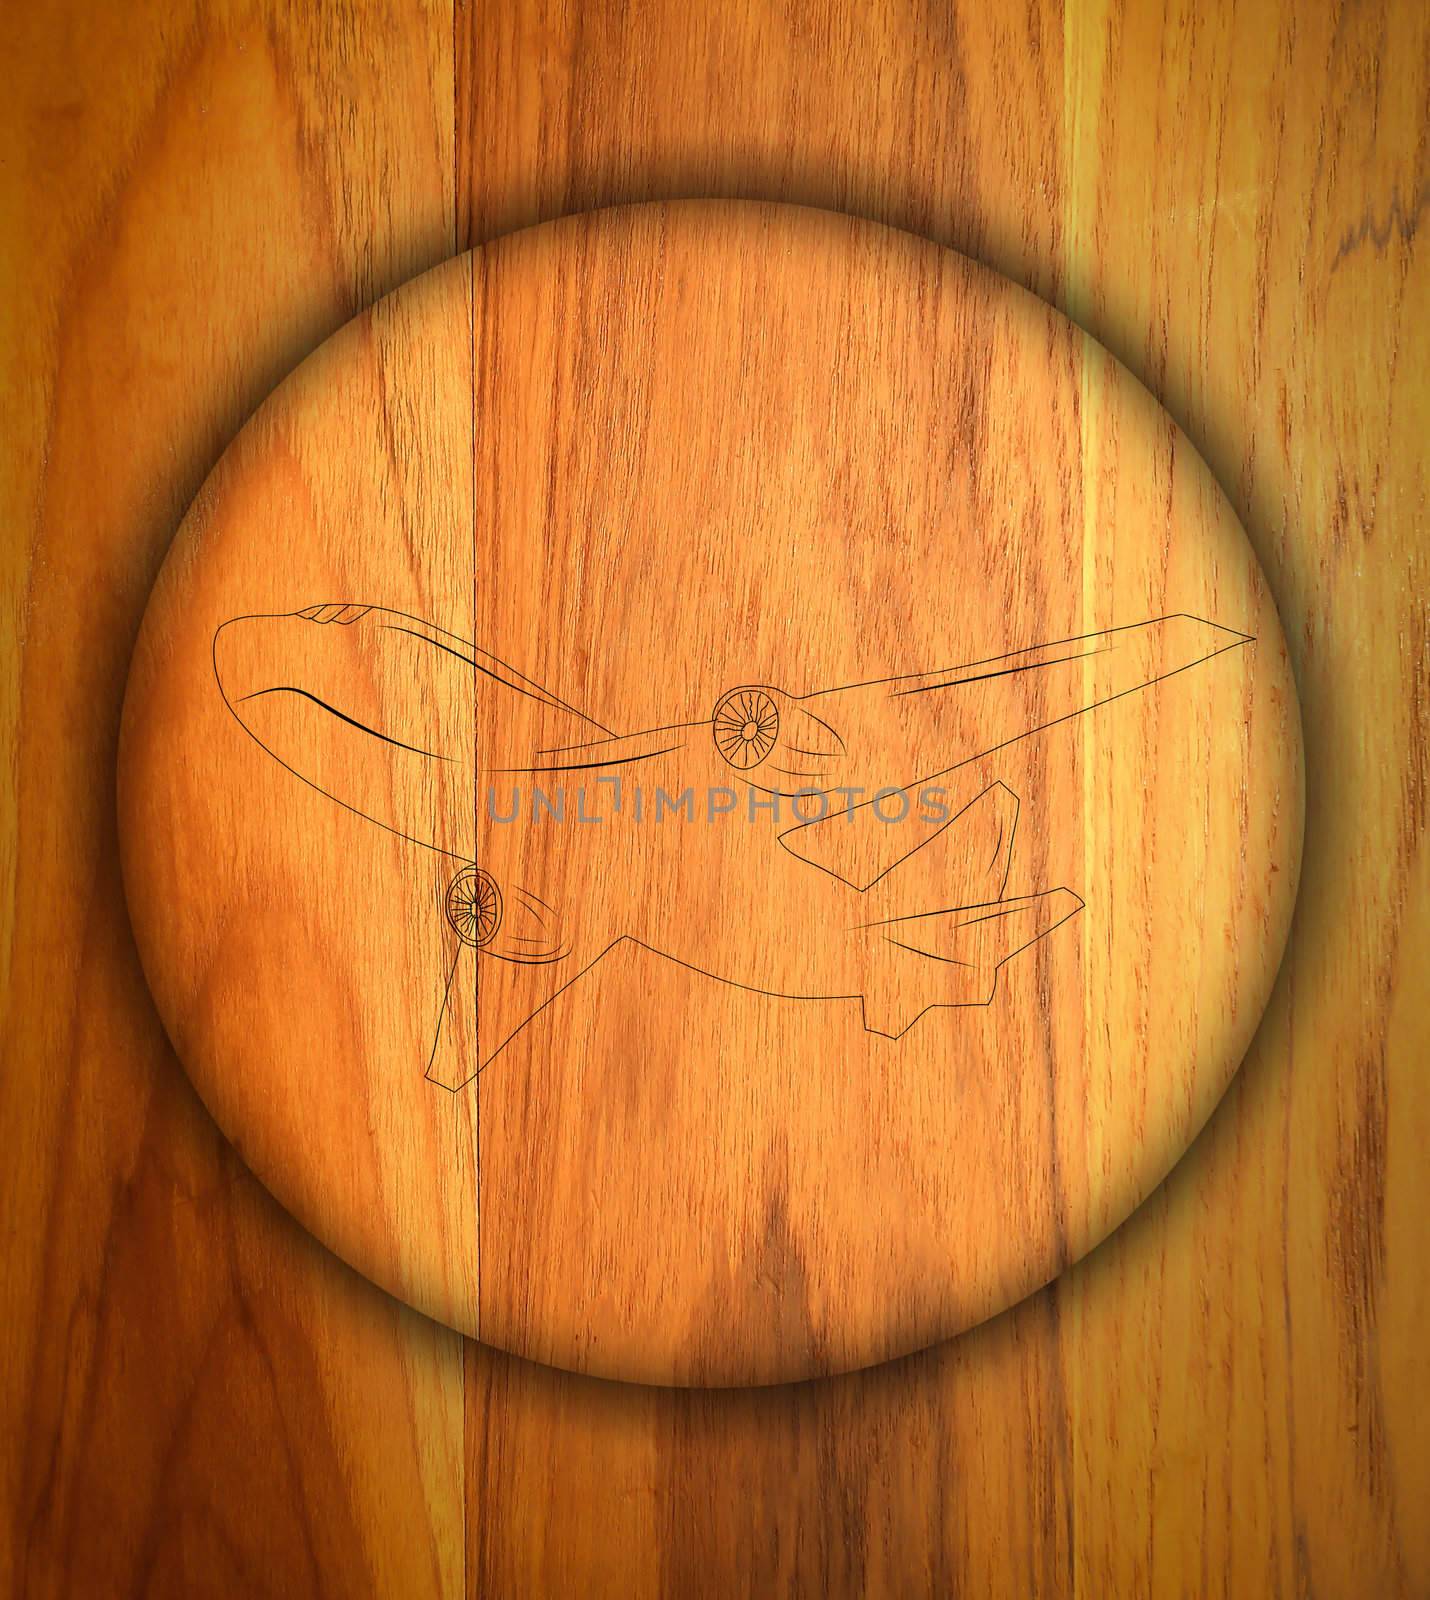 Airplane Sign icon on wood texture and background